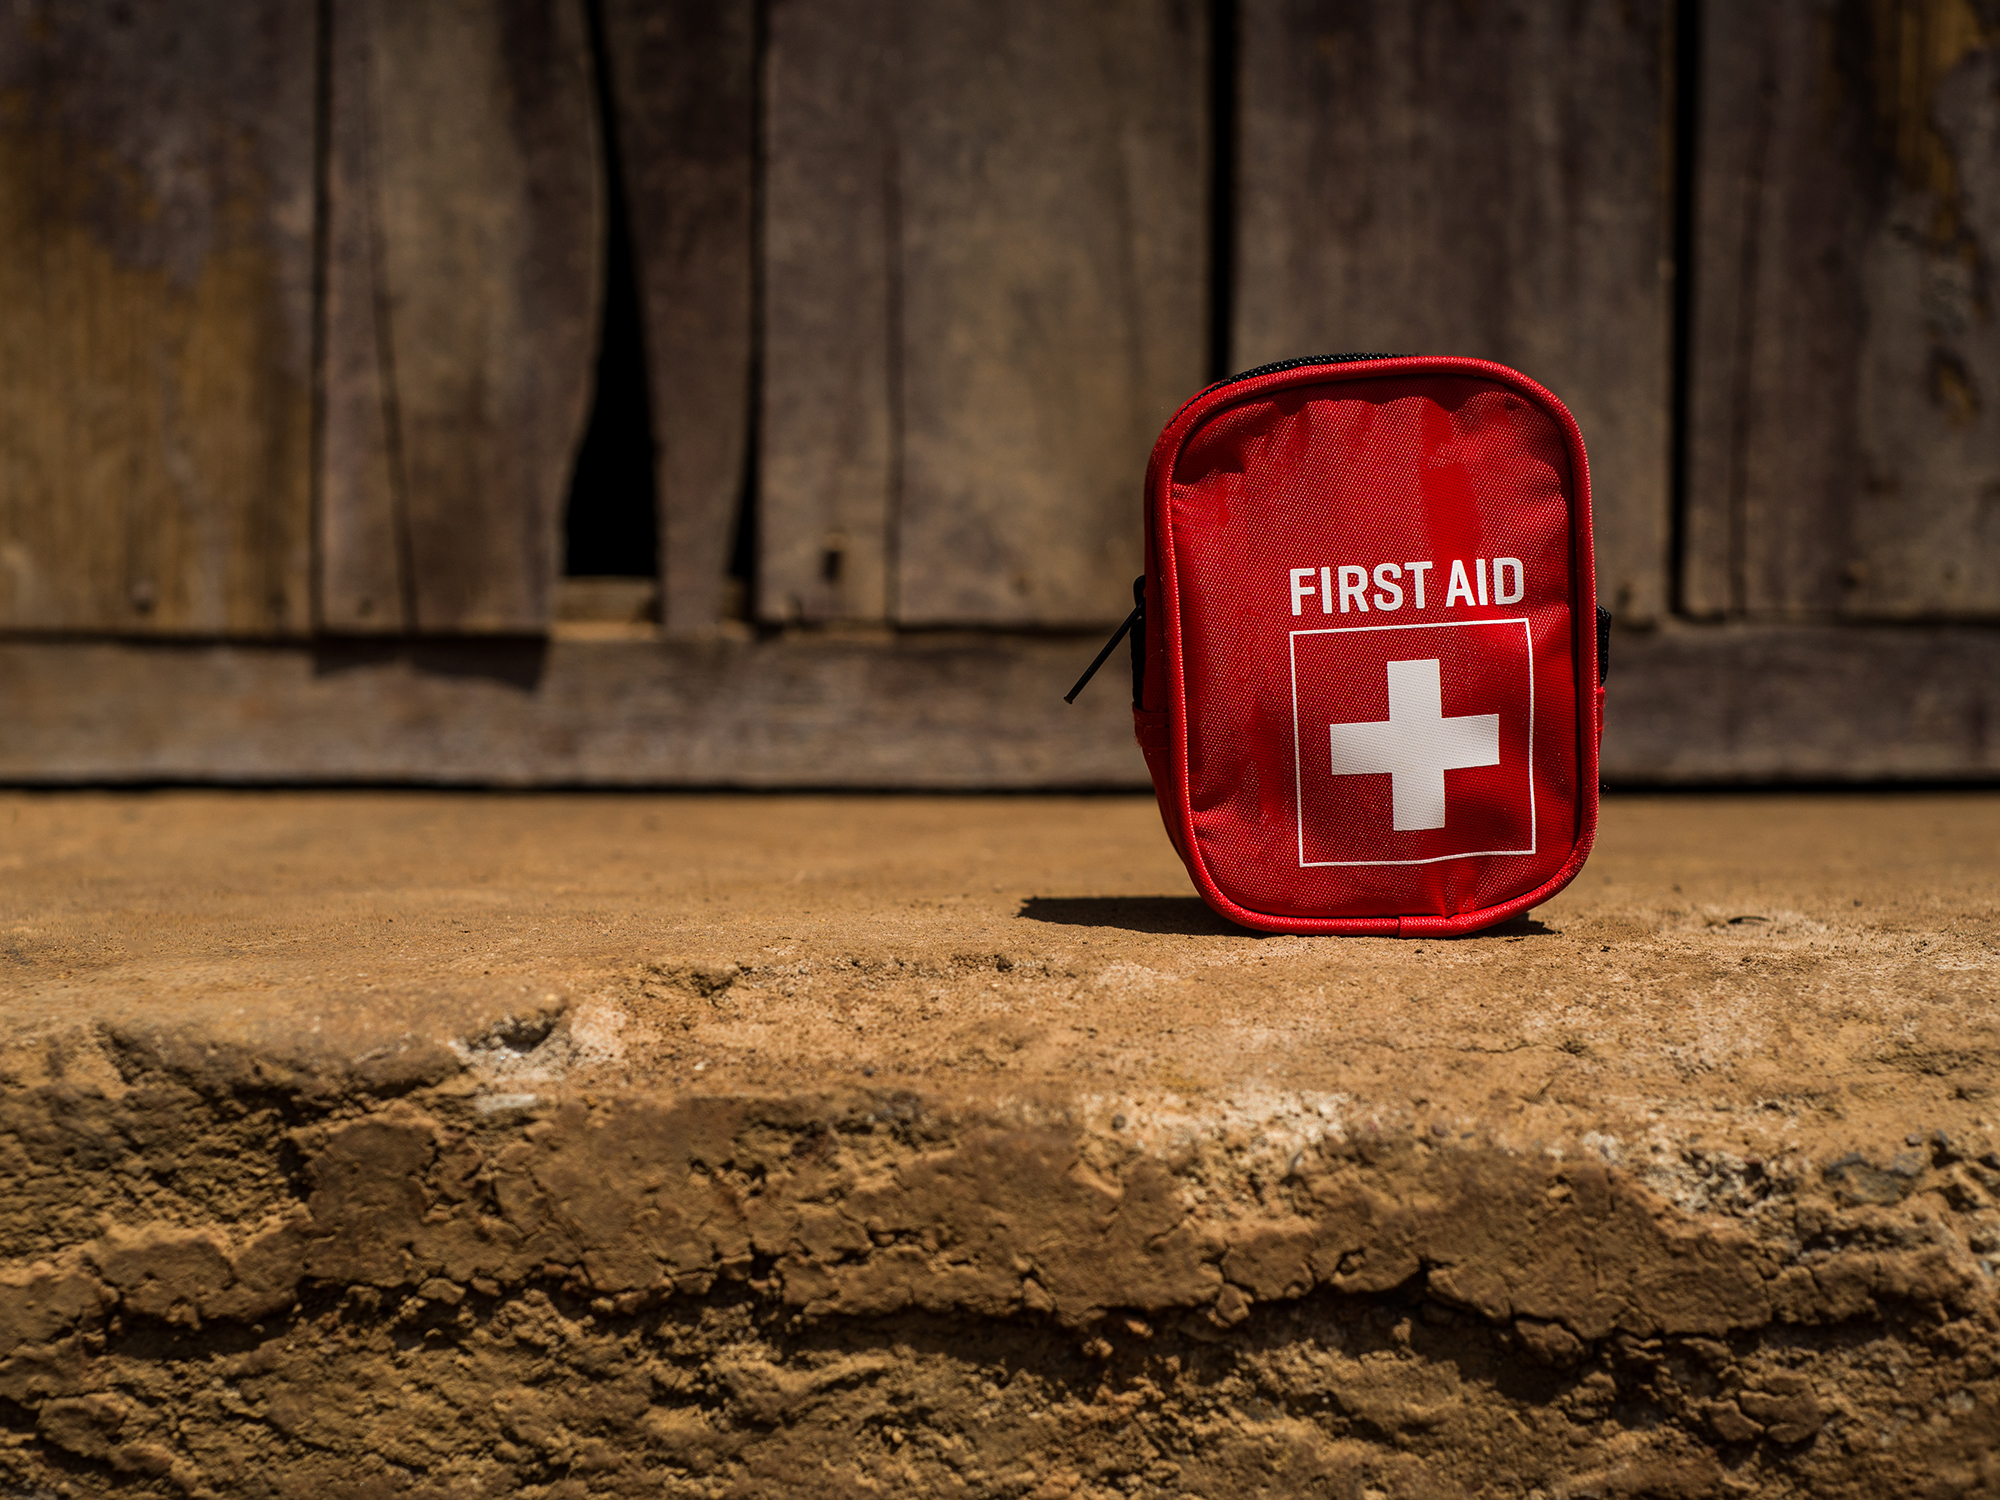 First aid kit bag on the ground.